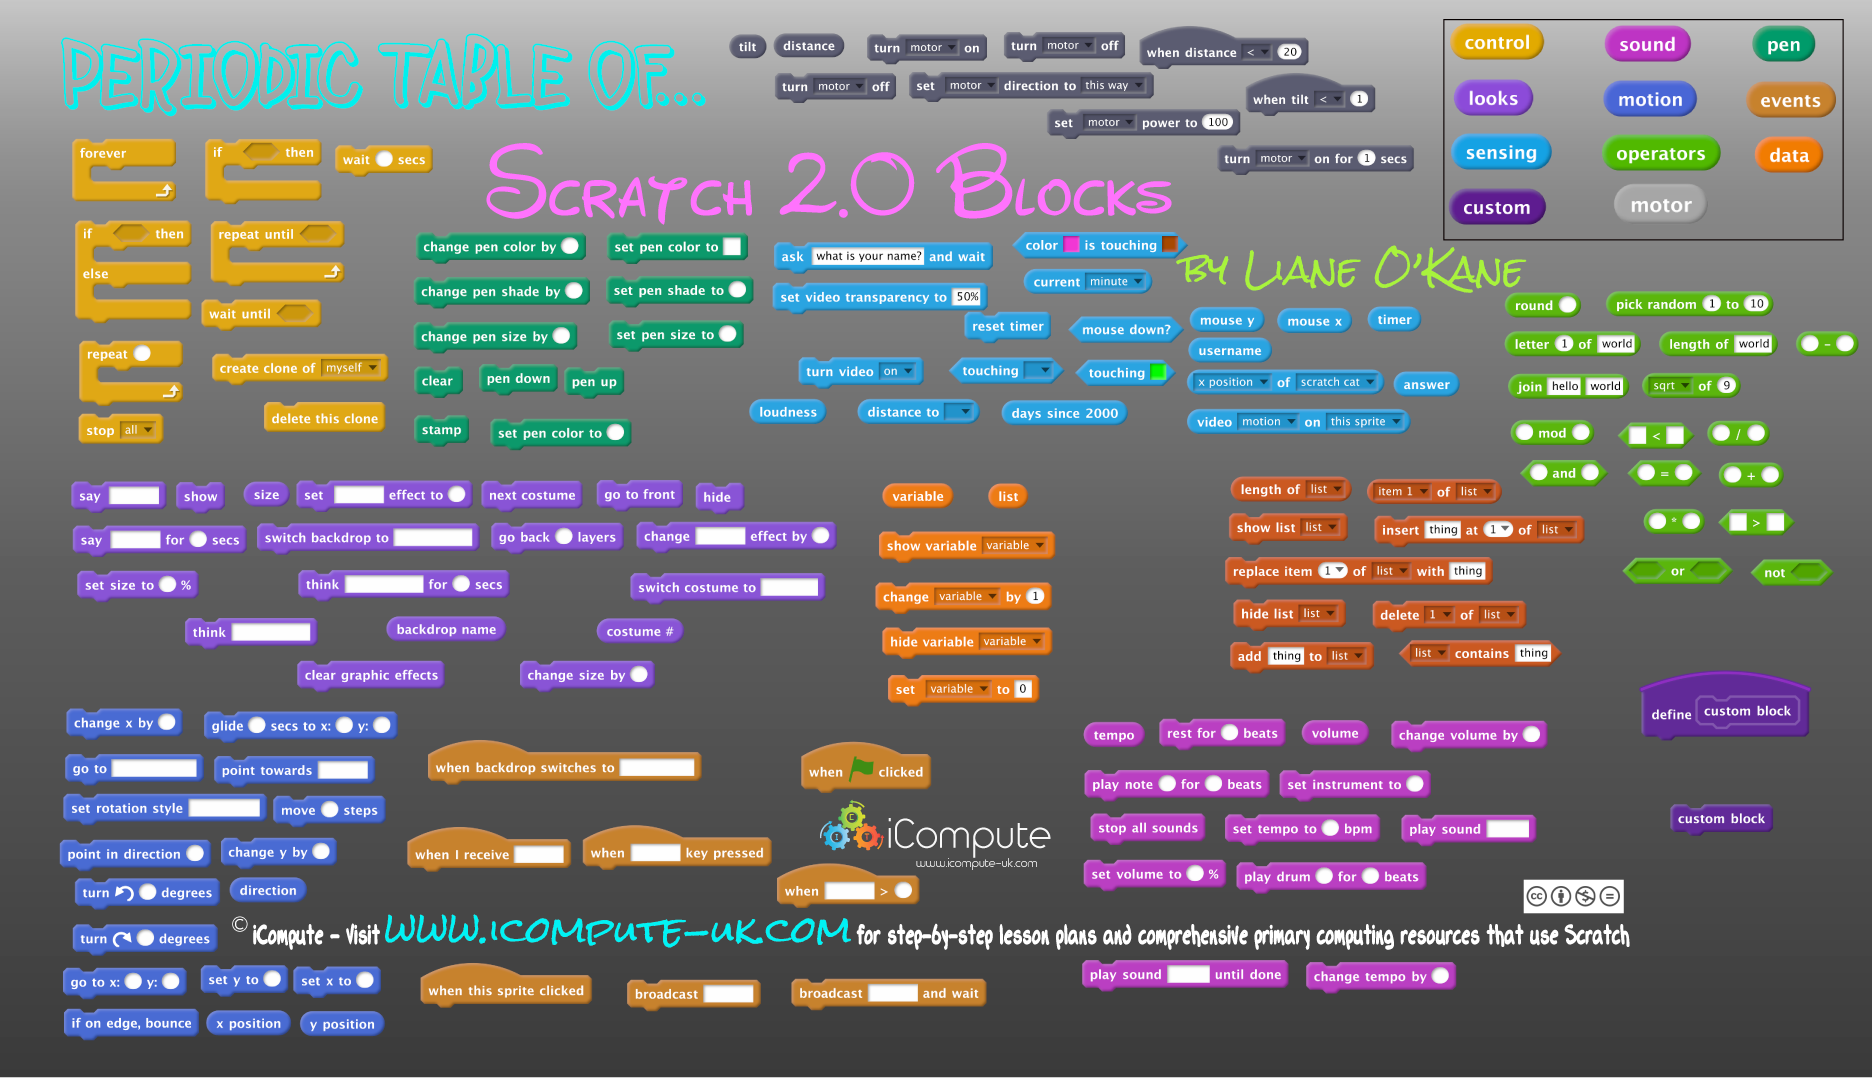 Periodic Table of Scratch 2.0 Blocks